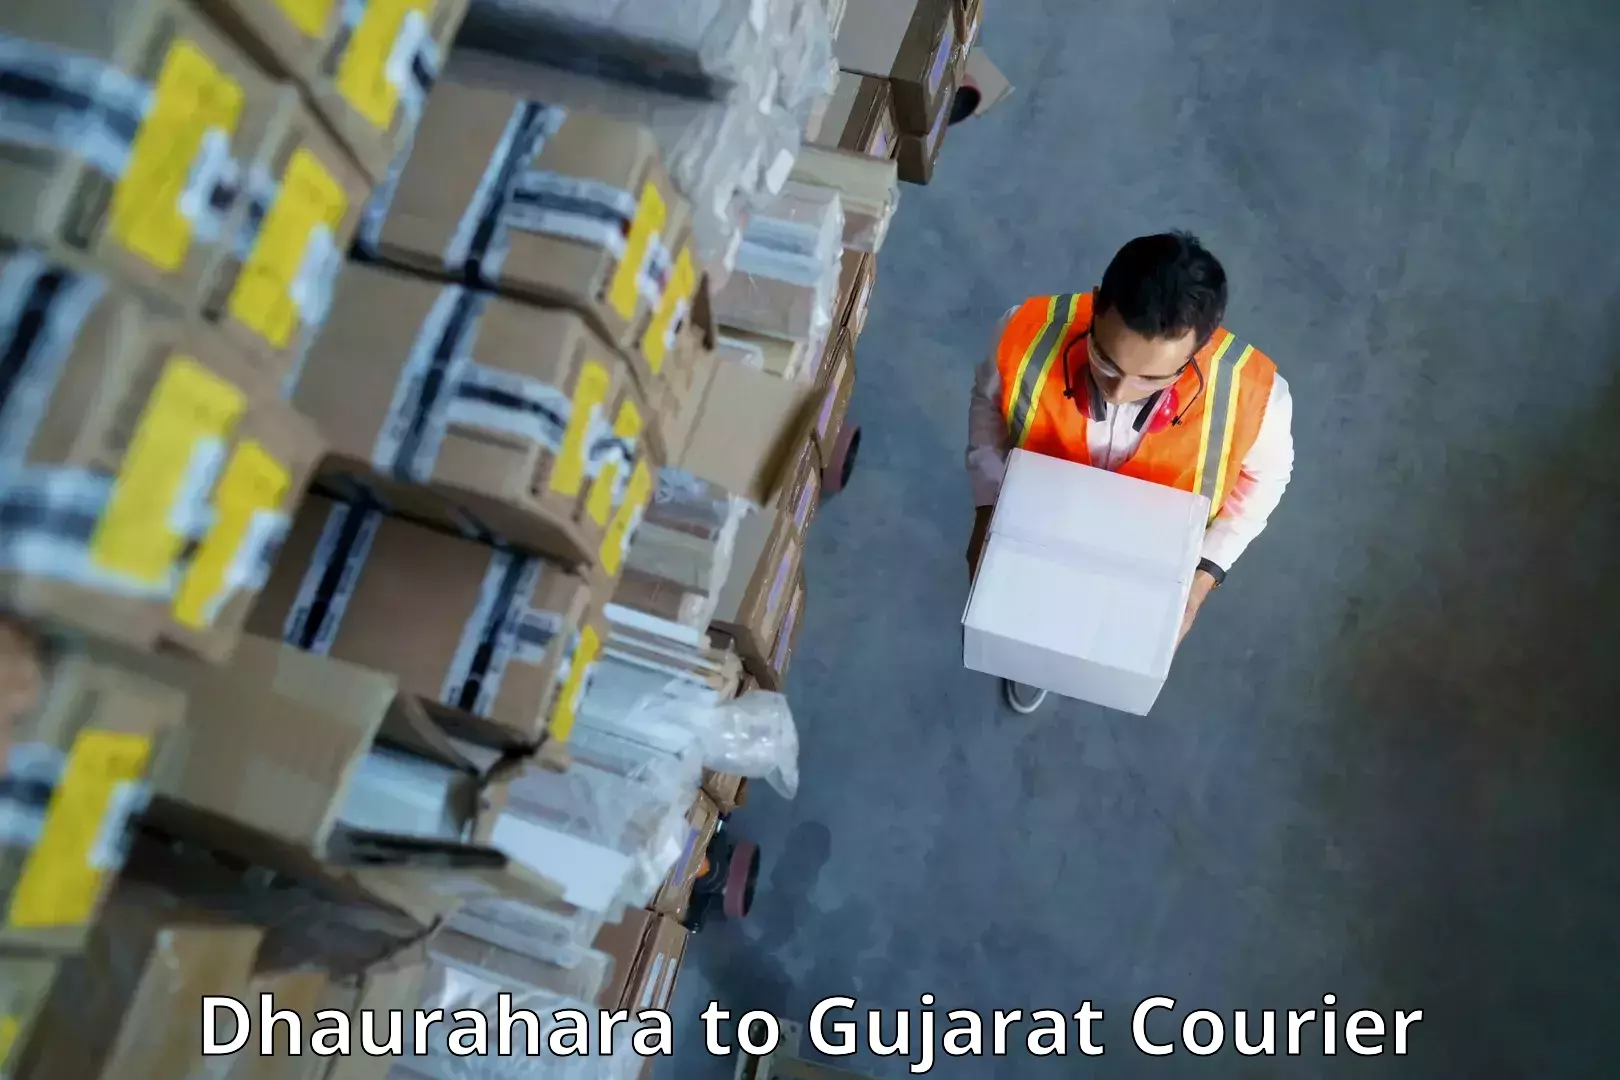 Nationwide delivery network Dhaurahara to Dwarka